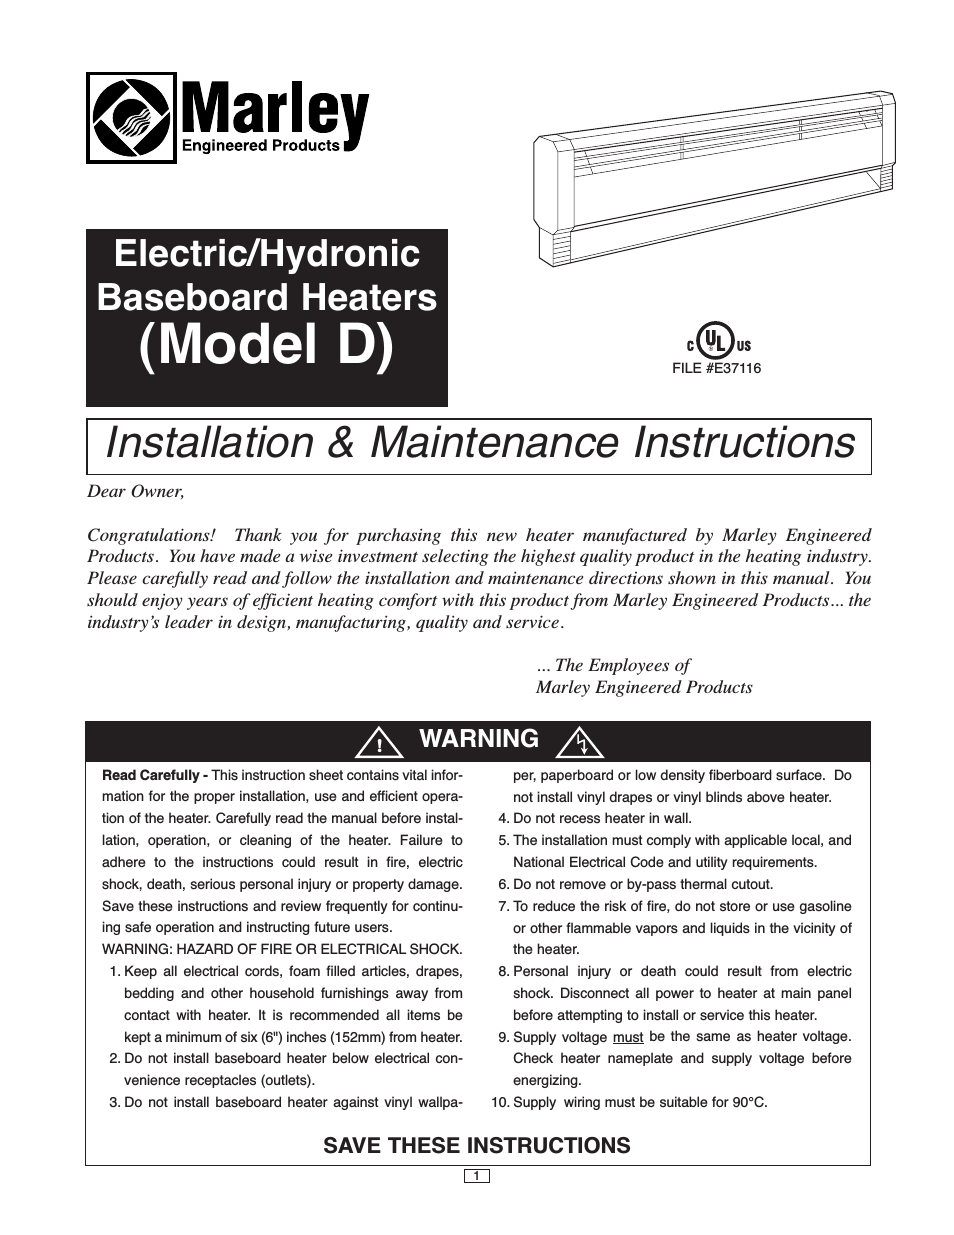 HBB Series - Electric Hydronic Baseboard Heaters